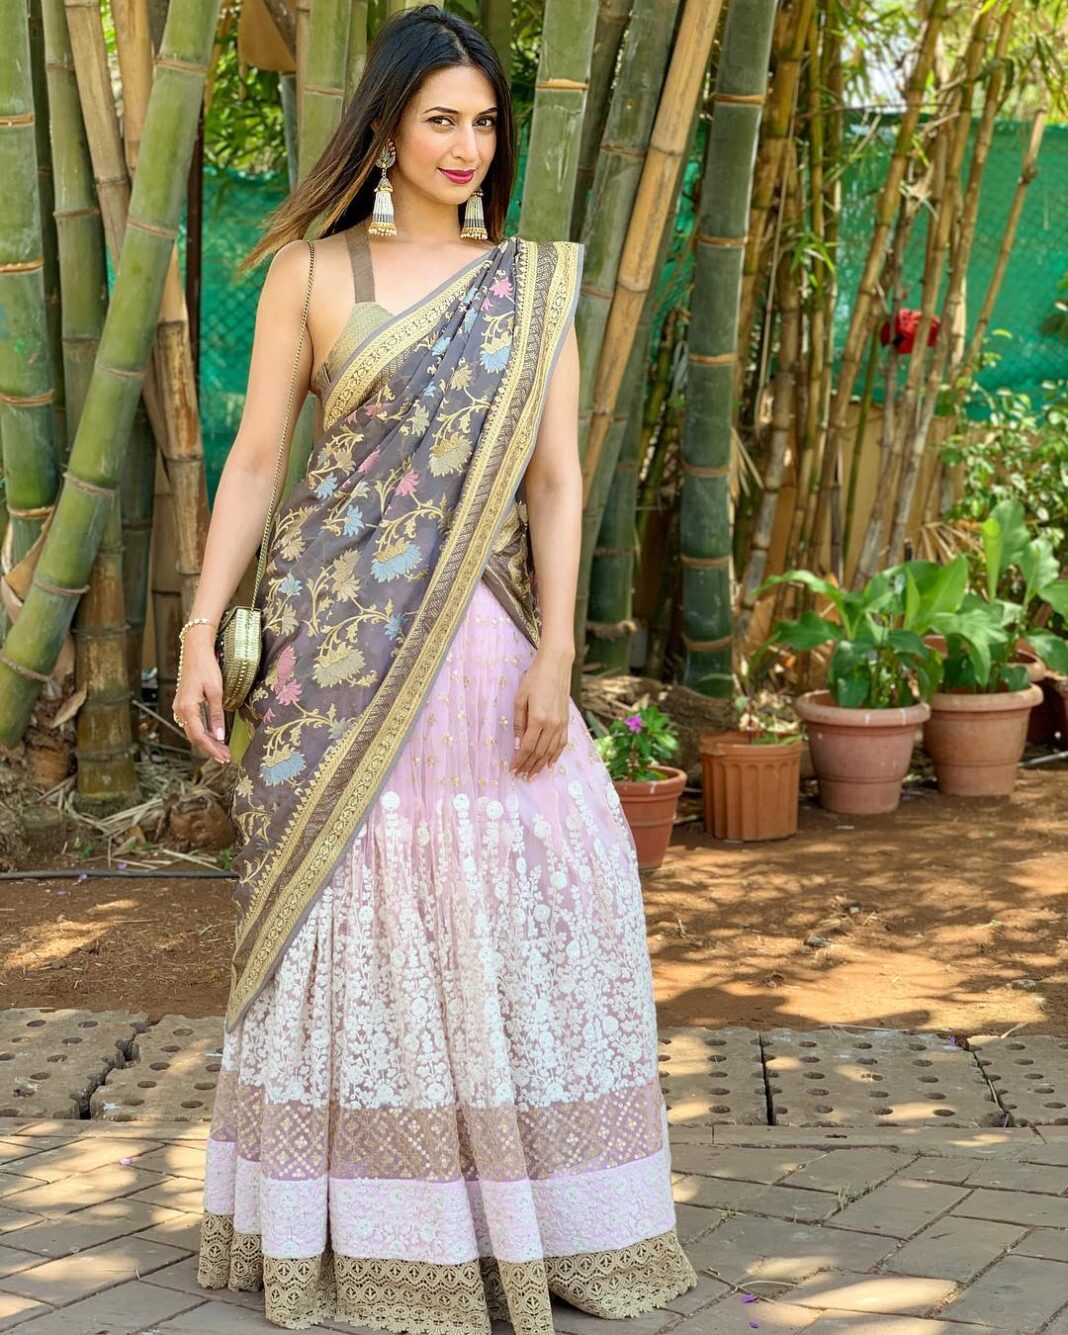 Divyanka Tripathi Instagram - #Summer and #Lehengas do go hand in hand.💗 Outfit @manish_reshamwala_label Jewellery @rimayu07 Styled by @stylingbyvictor Assisted by #sohailmughal Make up hair @manoj.regina Assisted by @avinash__501